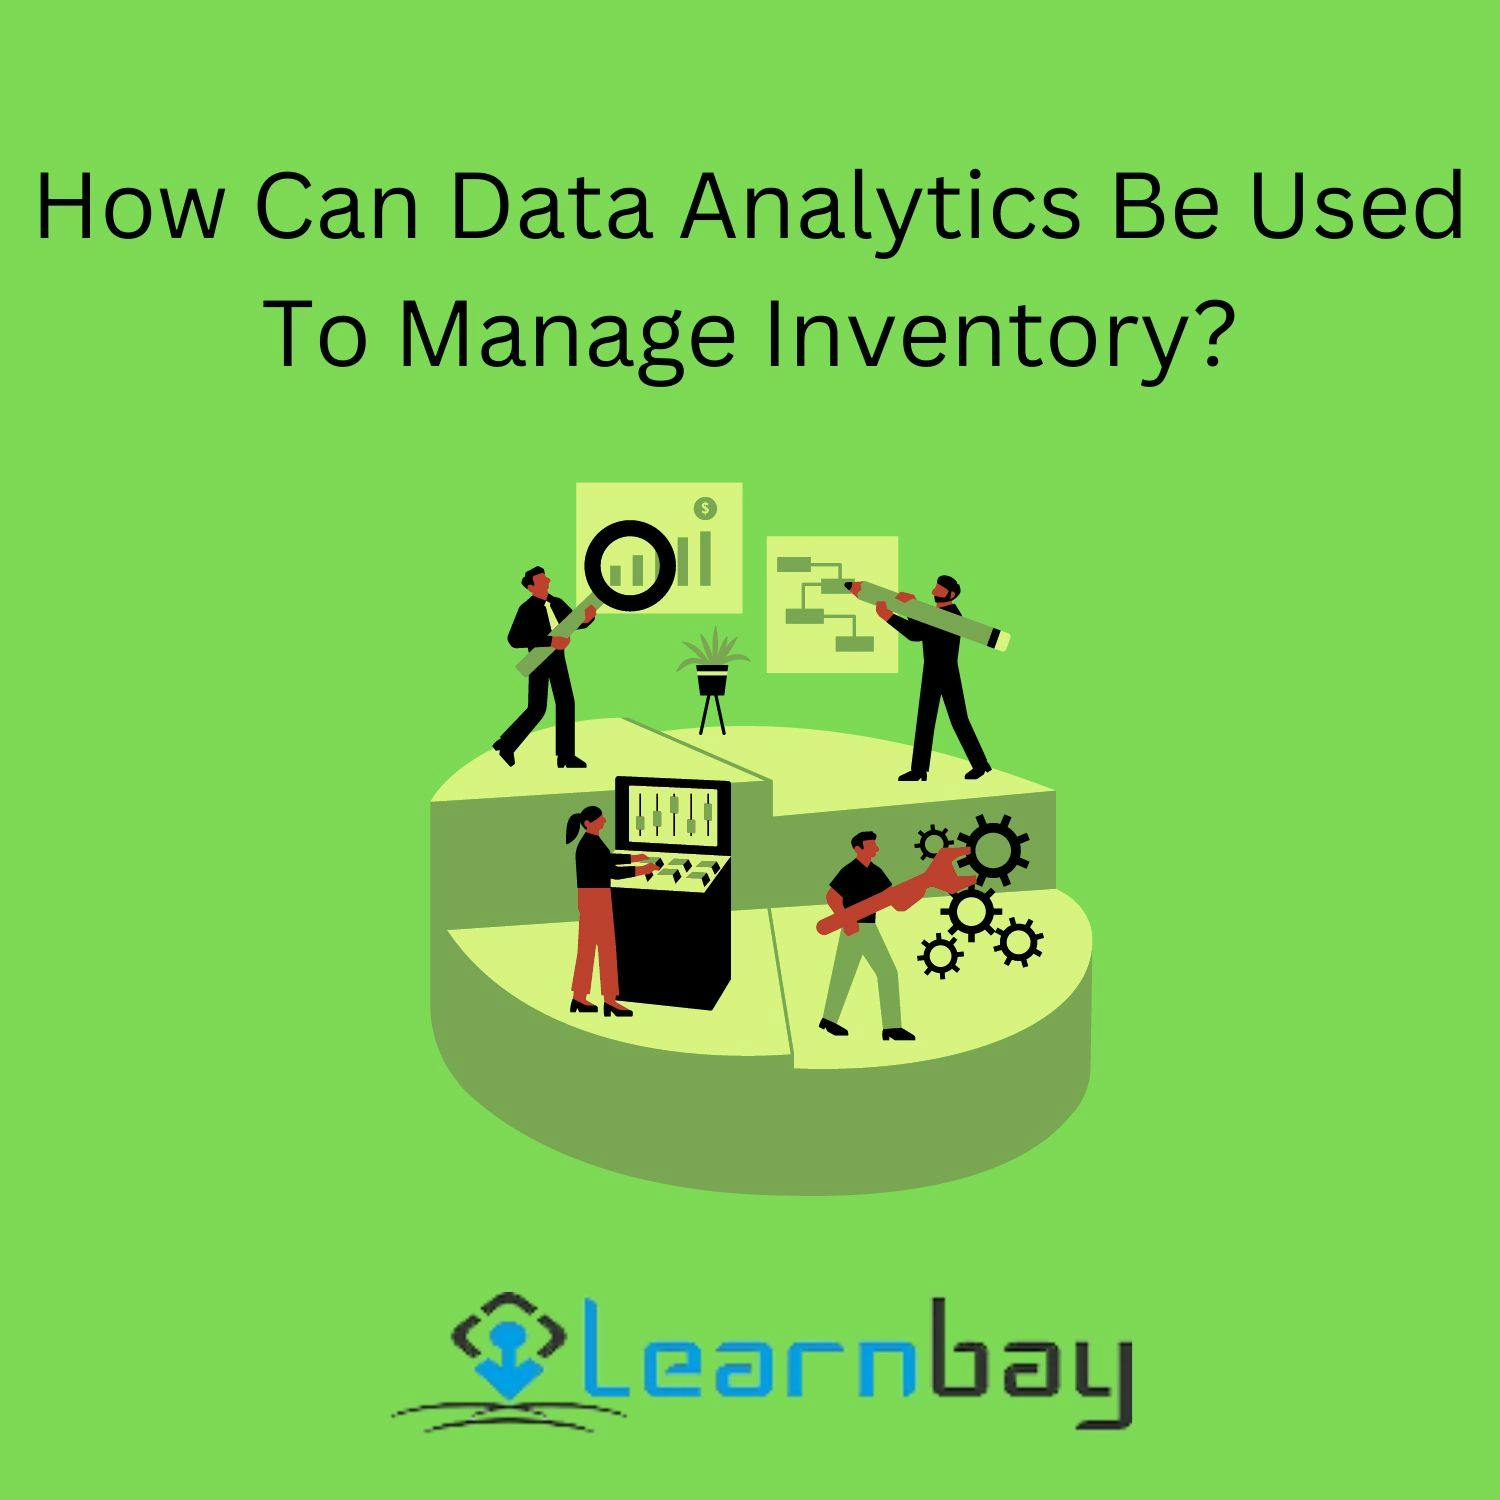 How Can Data Analytics Be Used To Manage Inventory.jpg